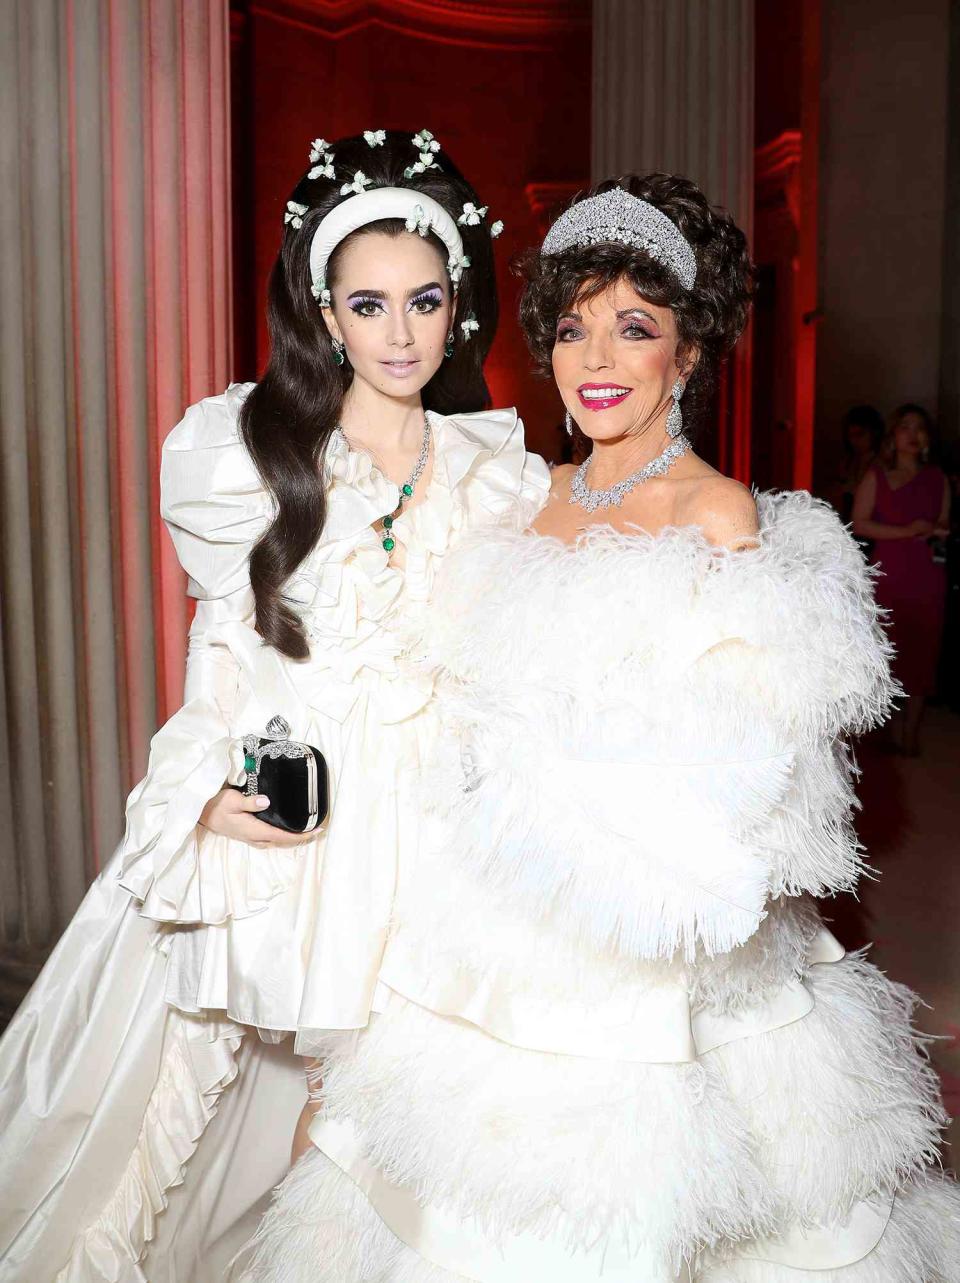 <p>Kevin Tachman/MG19/Getty</p> Lily Collins (left) and Joan Collins attend The 2019 Met Gala Celebrating Camp: Notes on Fashion at Metropolitan Museum of Art on May 06, 2019 in New York City